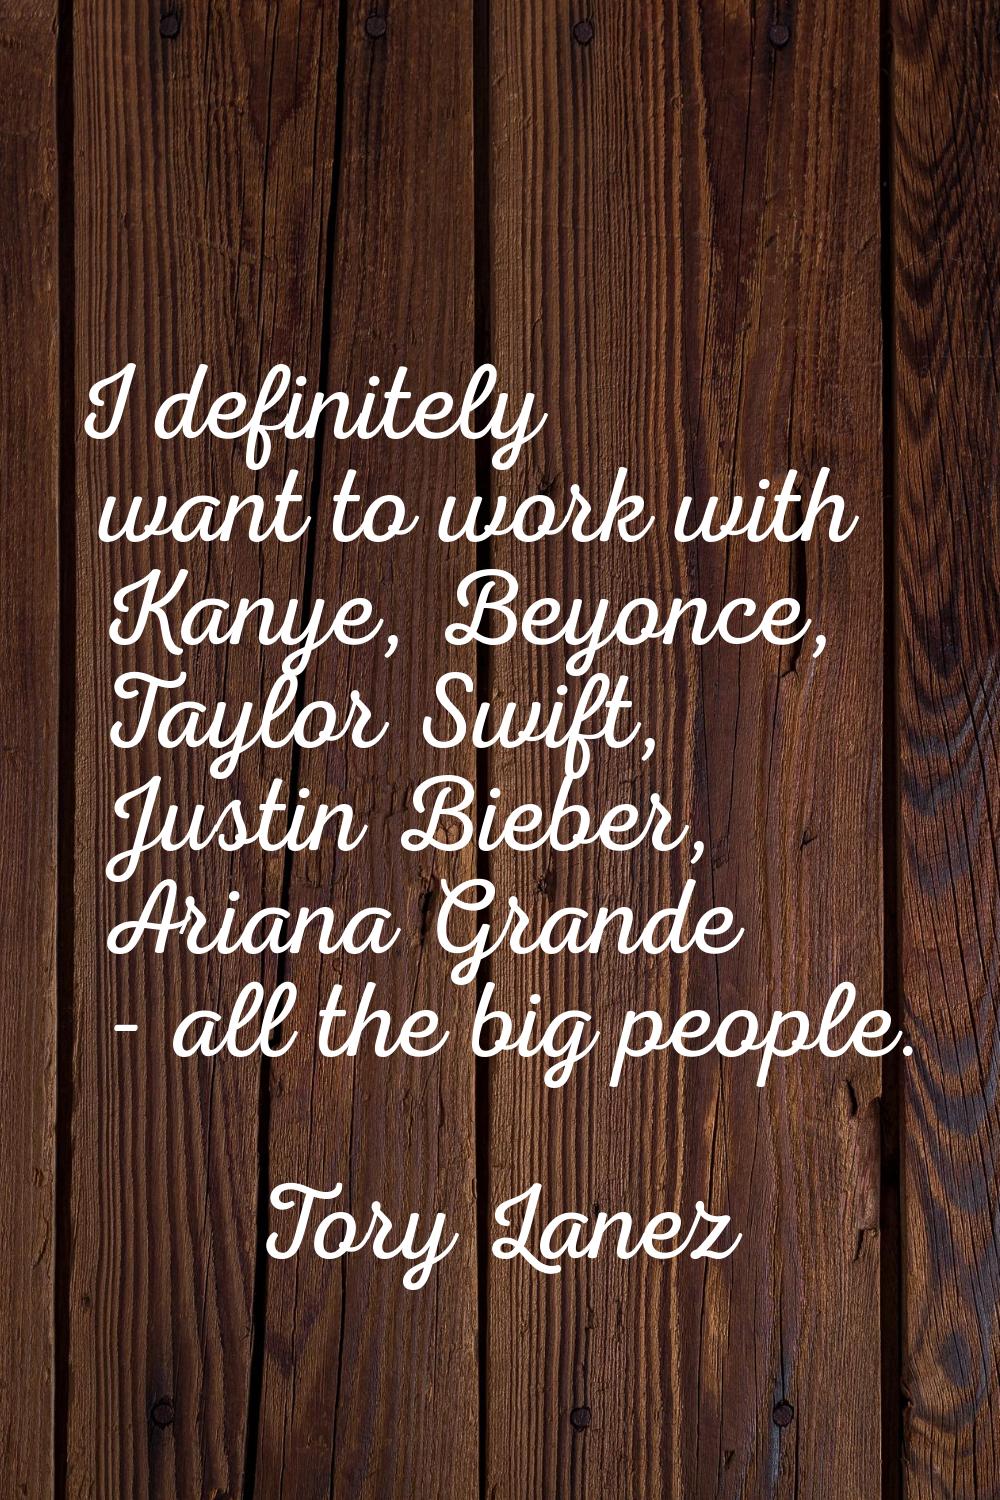 I definitely want to work with Kanye, Beyonce, Taylor Swift, Justin Bieber, Ariana Grande - all the